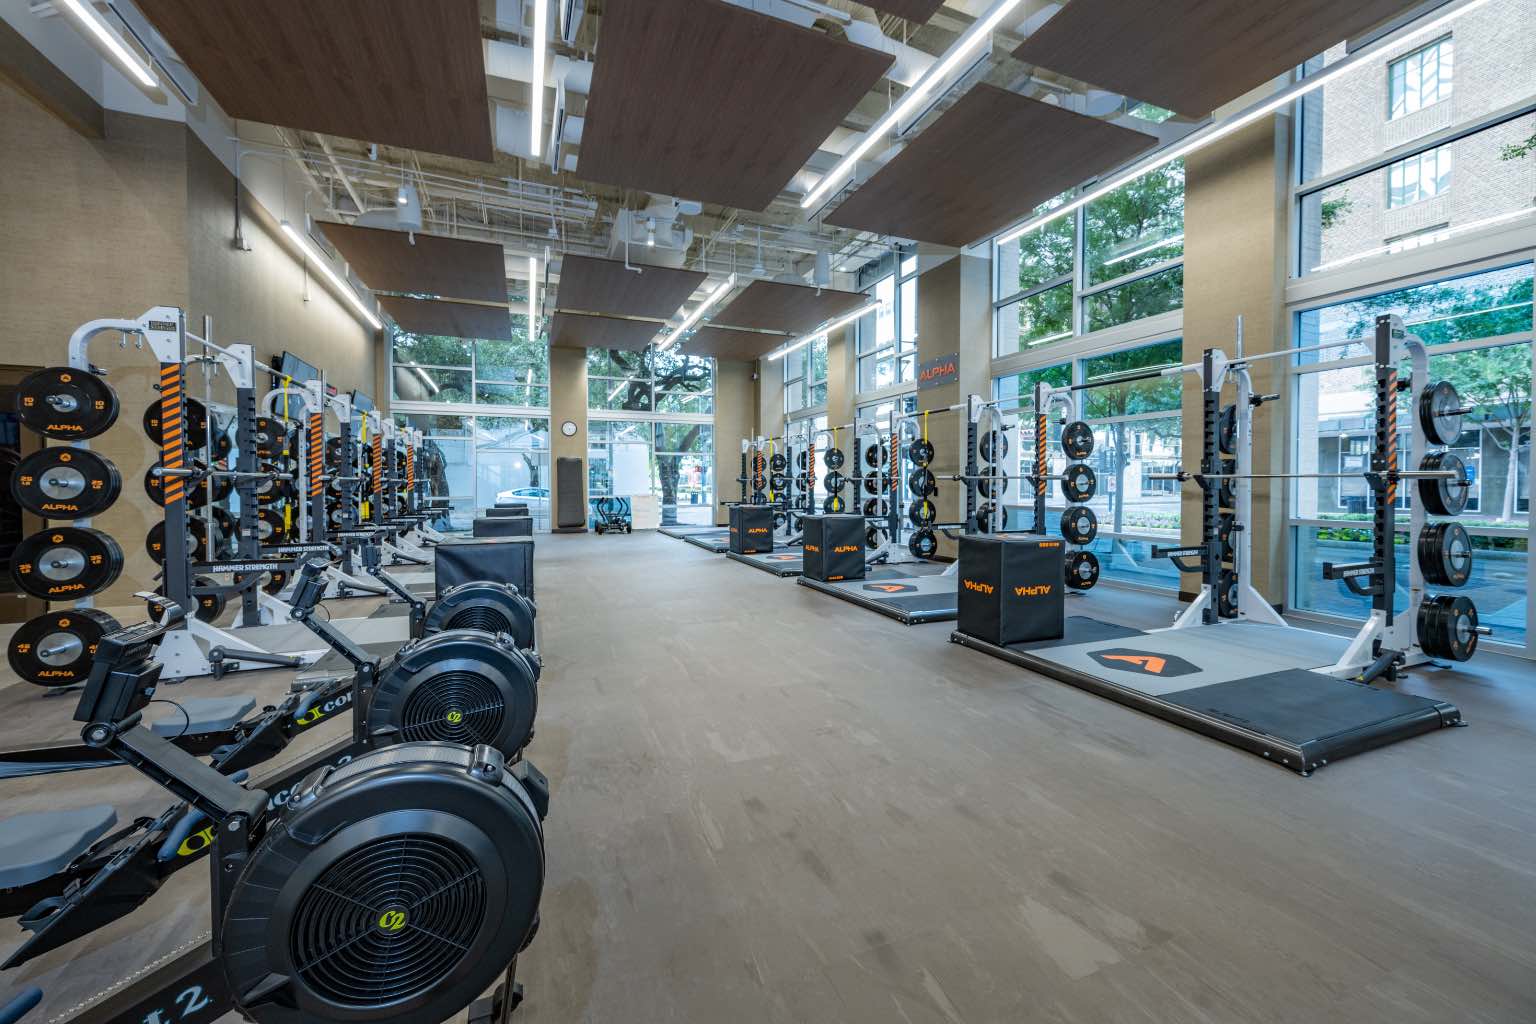 workout machines on the group fitness floor